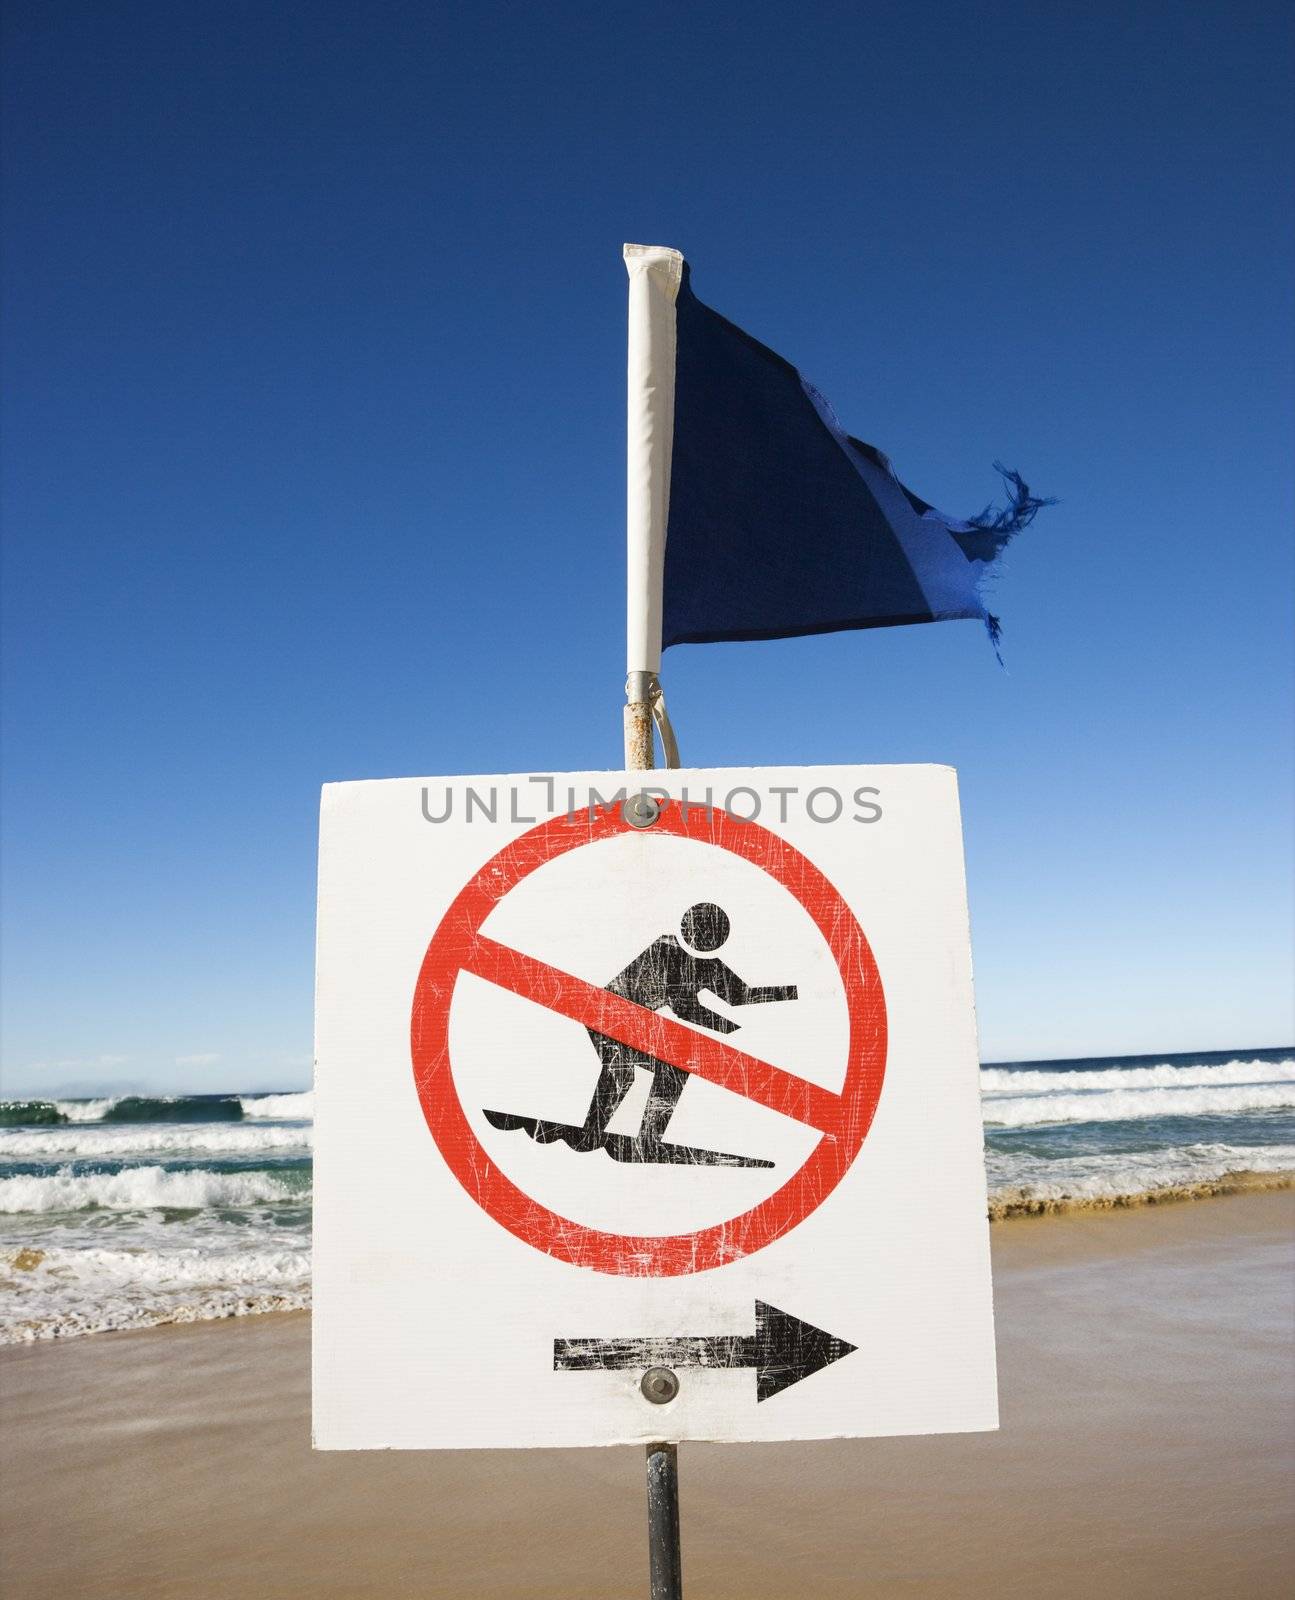 No surfing sign and flag on beach at Surfers Paradise, Australia.